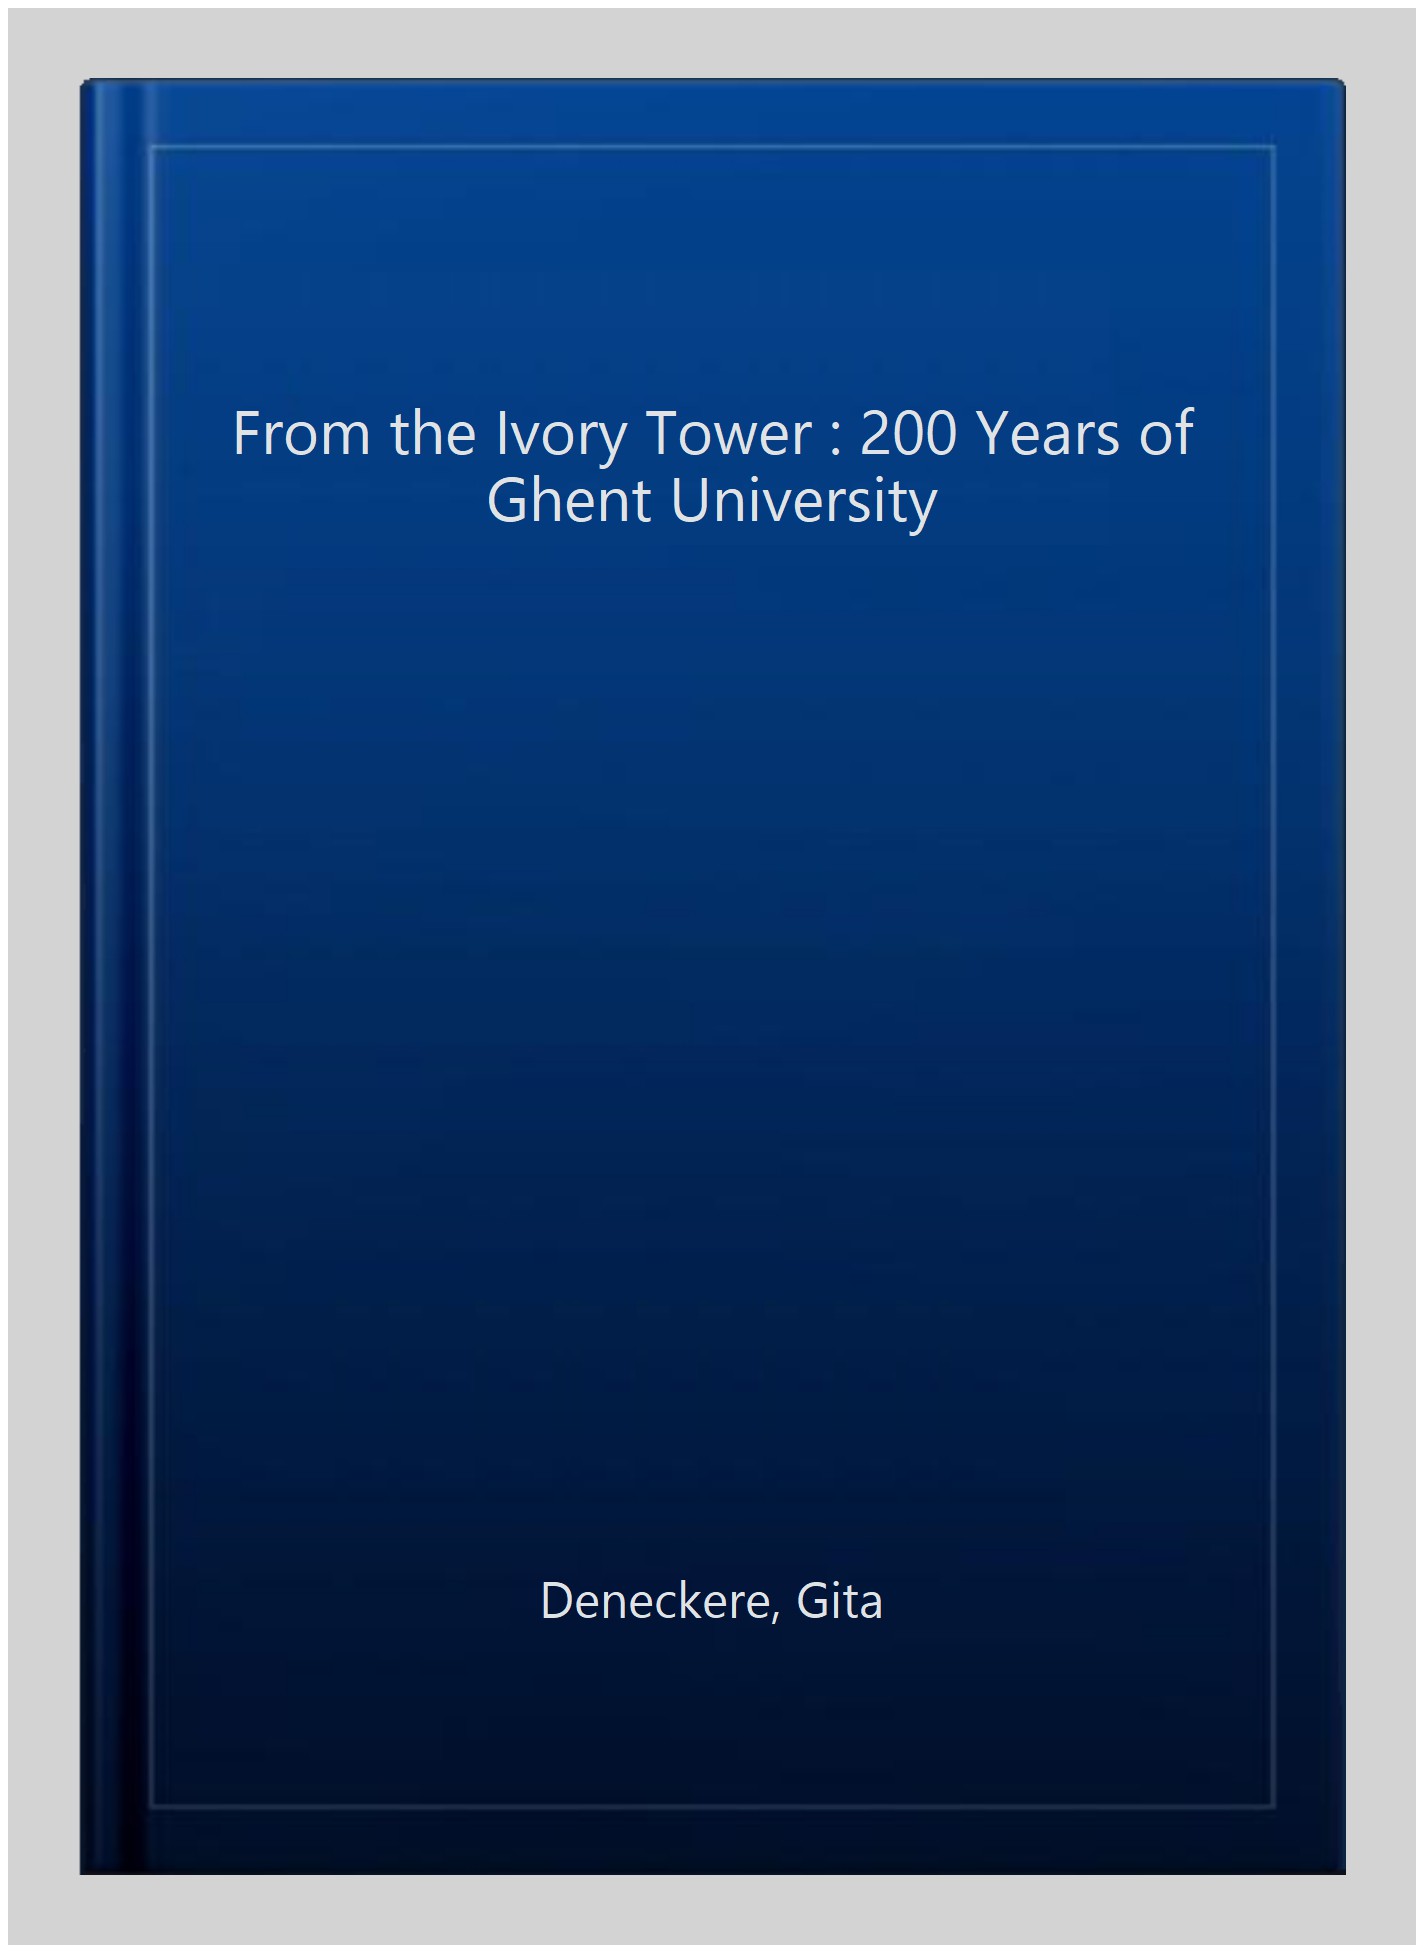 From the Ivory Tower : 200 Years of Ghent University - Deneckere, Gita